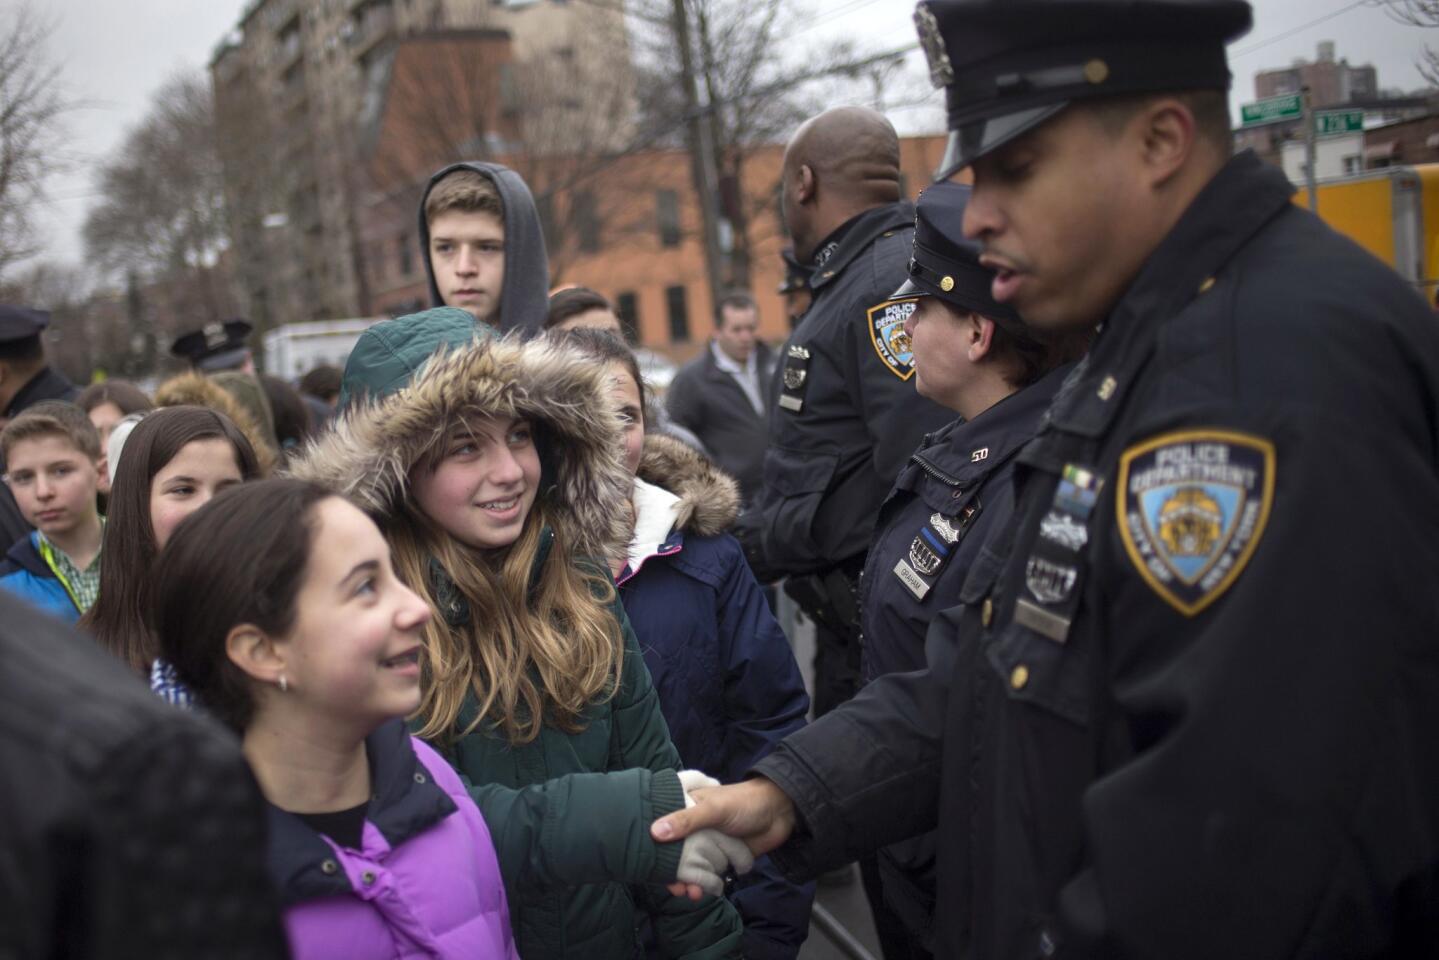 School children, who gathered with dozens to show support for policemen two days after officers Wenjian Liu and Rafael Ramos were shot and killed, meet with New York Police Department (NYPD) officers\